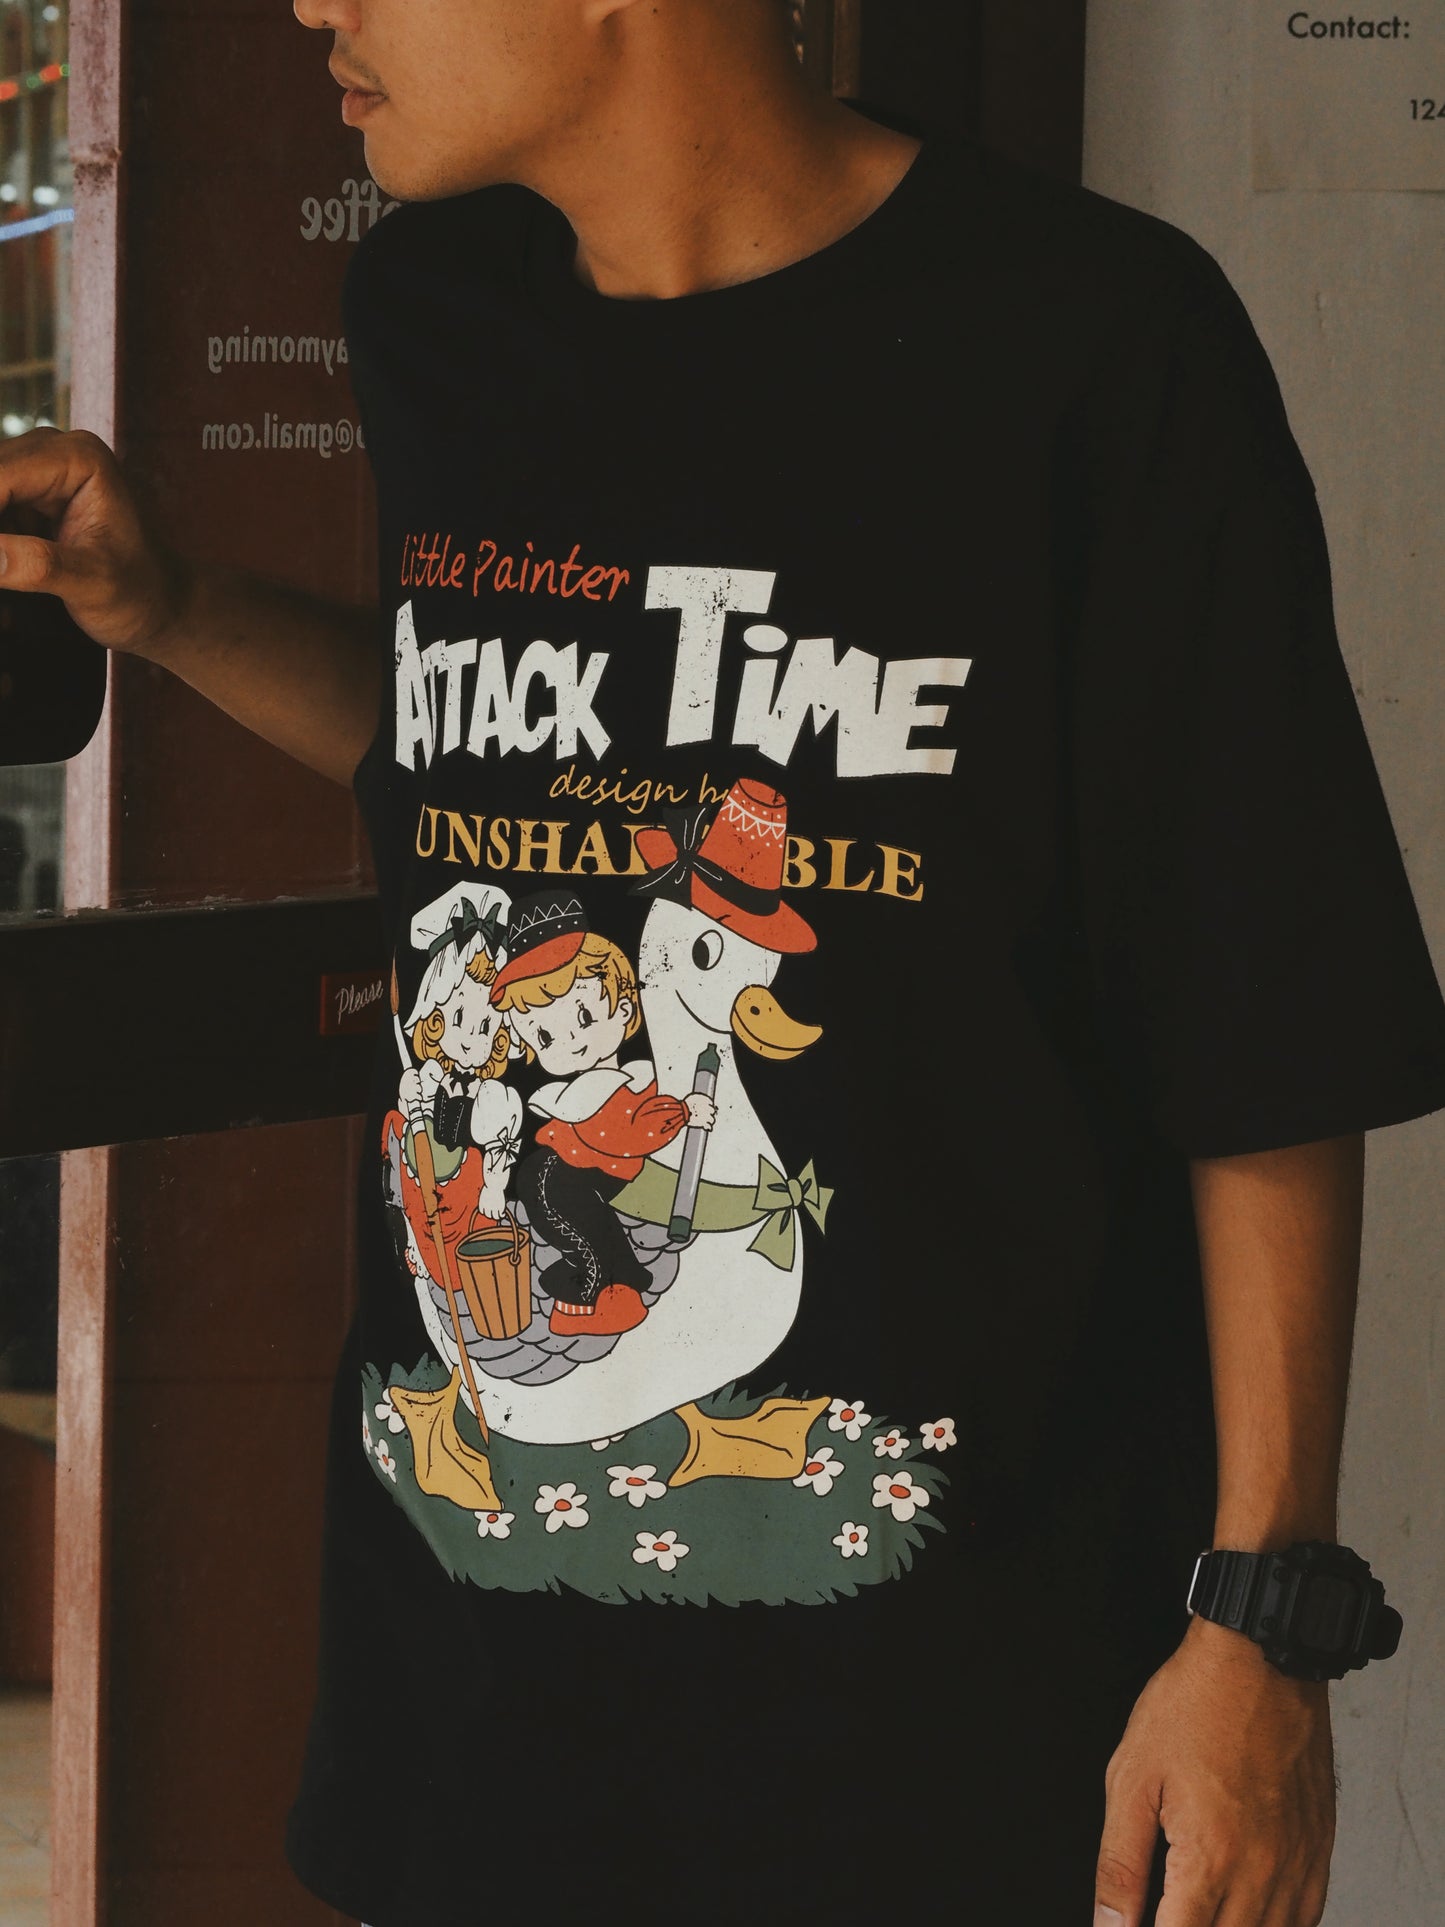 Attack Time Oversized Tee